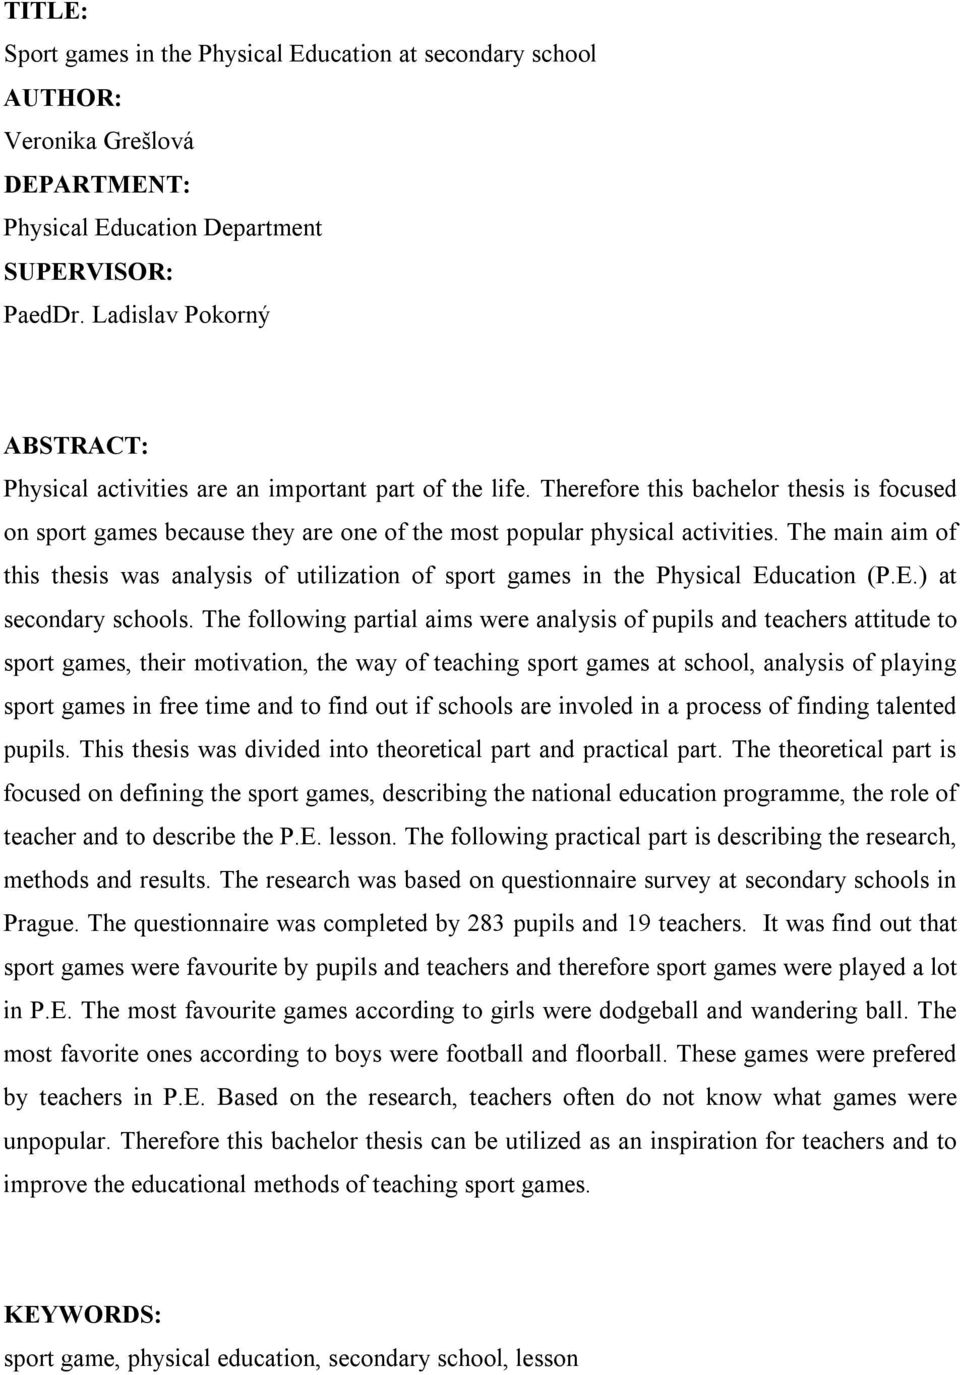 The main aim of this thesis was analysis of utilization of sport games in the Physical Education (P.E.) at secondary schools.